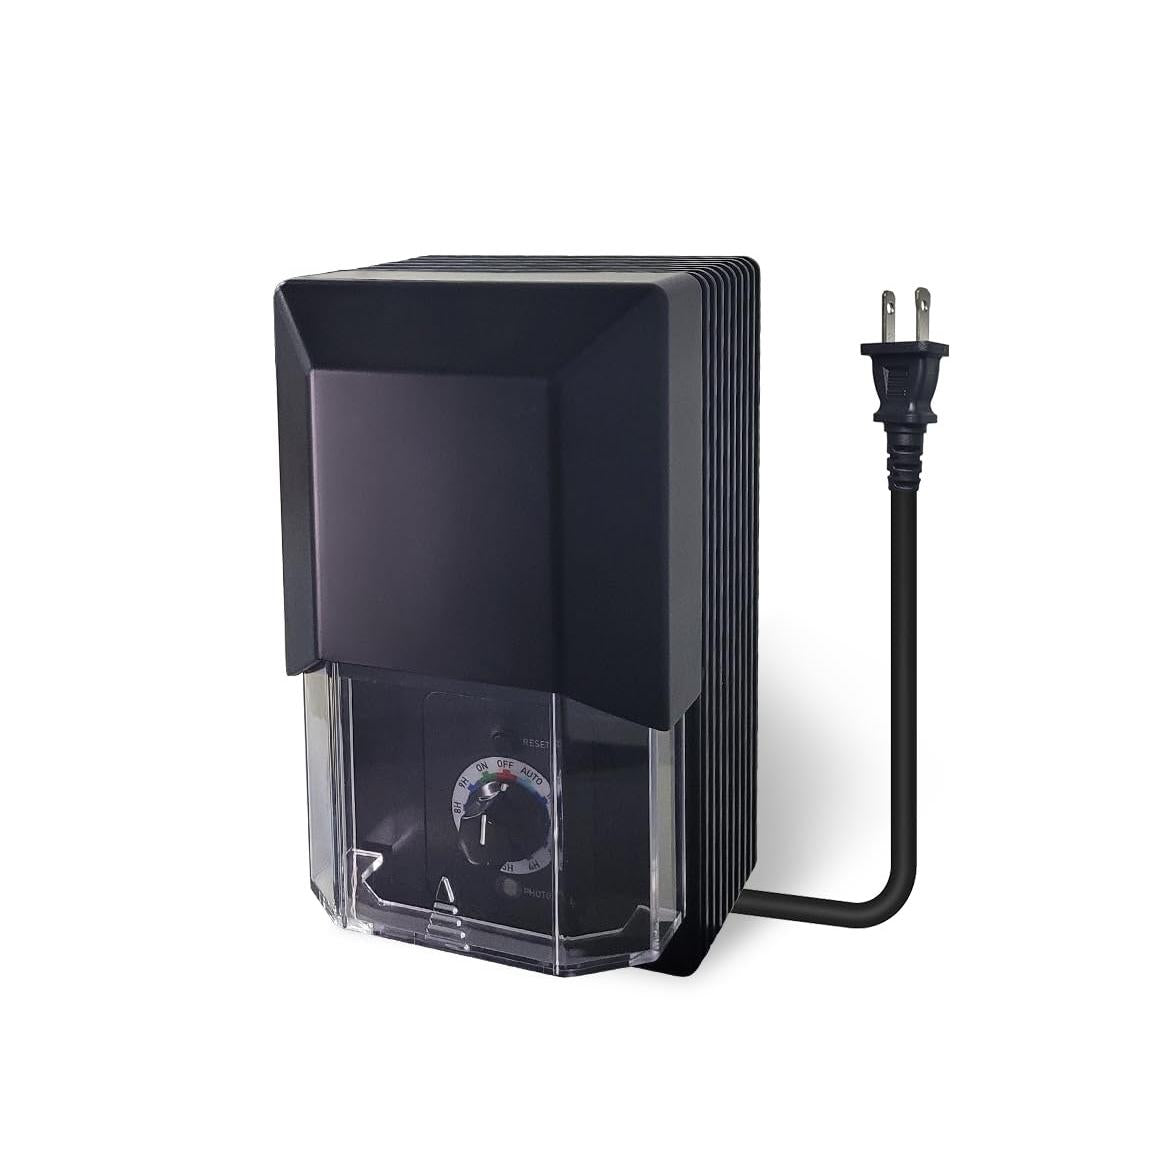 100W 200W low voltage 2COM multi-tap transformer with clear cover and power cord for outdoor landscape lighting